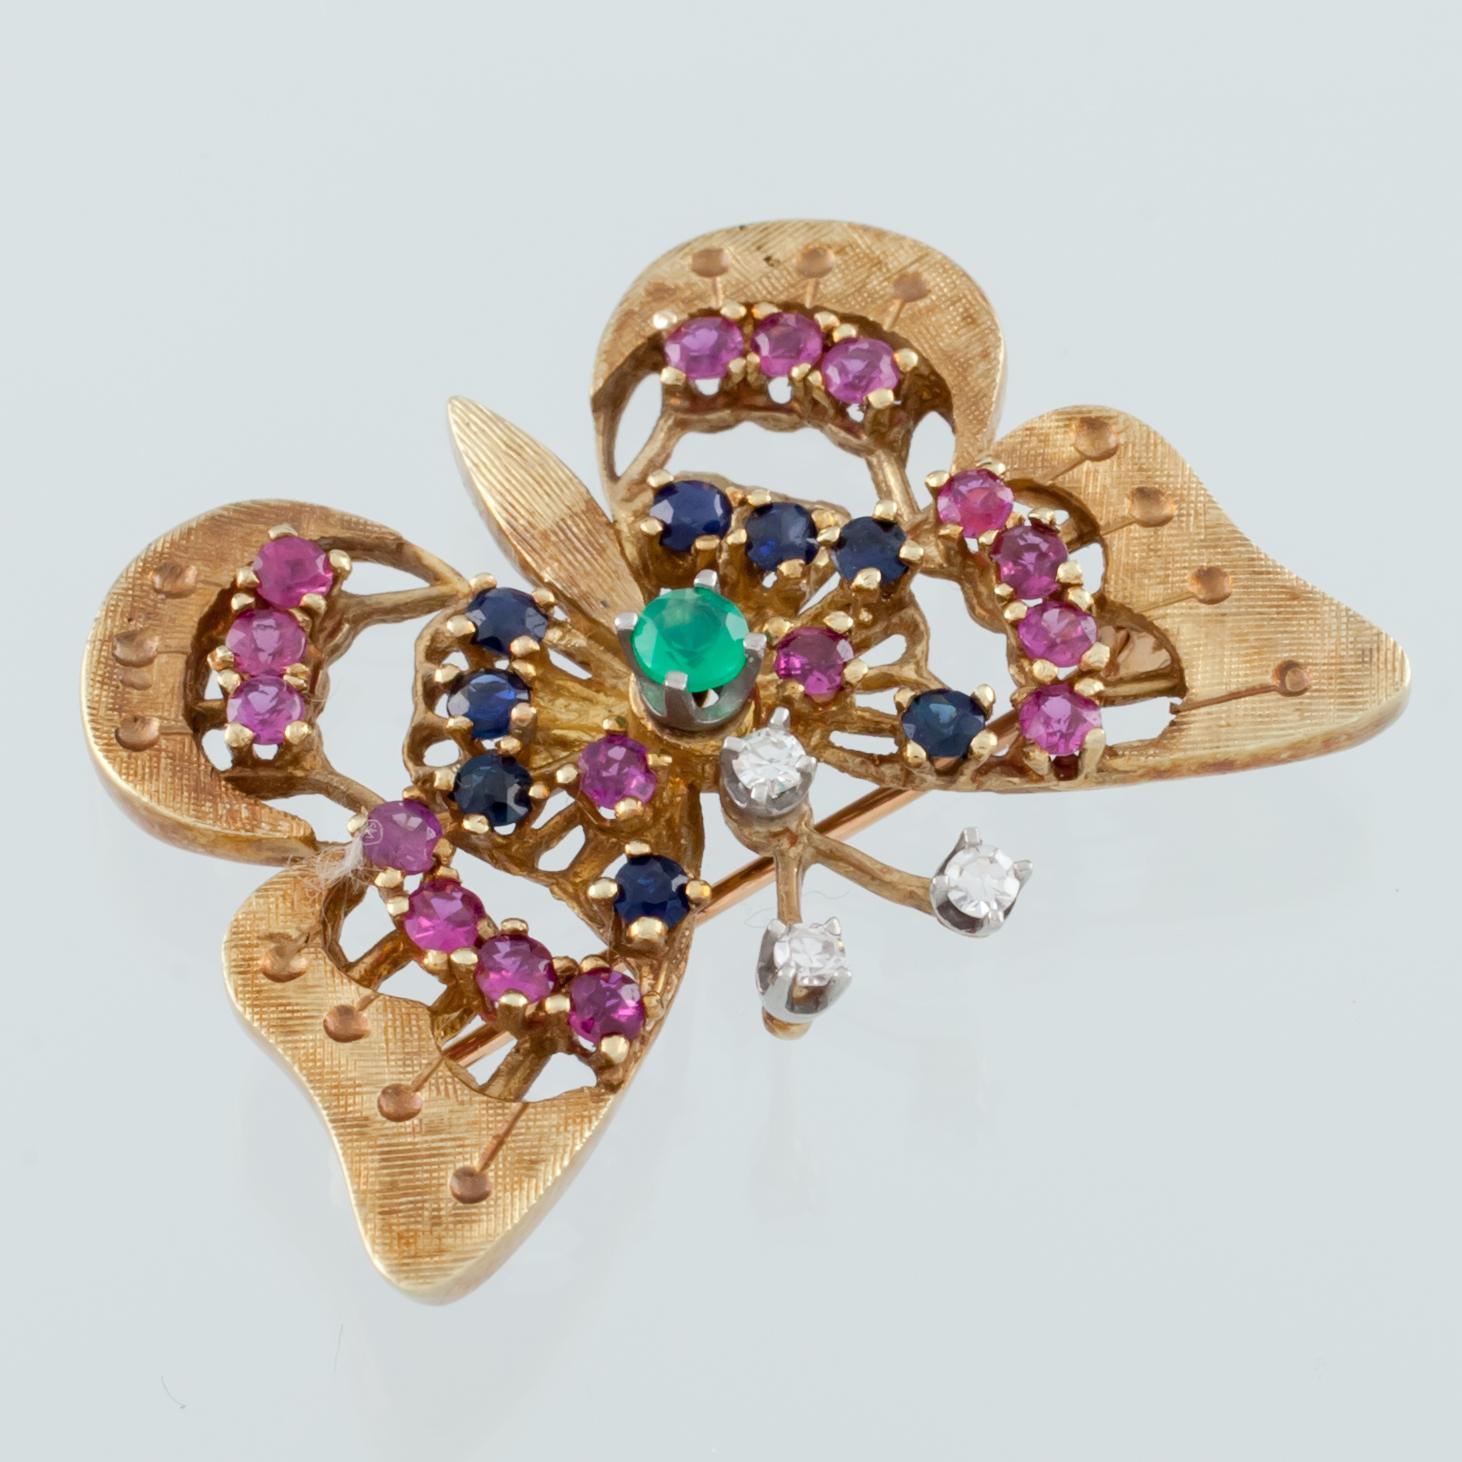 Gorgeous Butterfly Brooch
Features Prong Set Emerald, Sapphires, and Rubies in Radial Pattern from Center
Diamond Accents on Antennae
33 mm Wide
23 mm Long
Total Mass = 7.7 grams
Reverse Hallmarked 